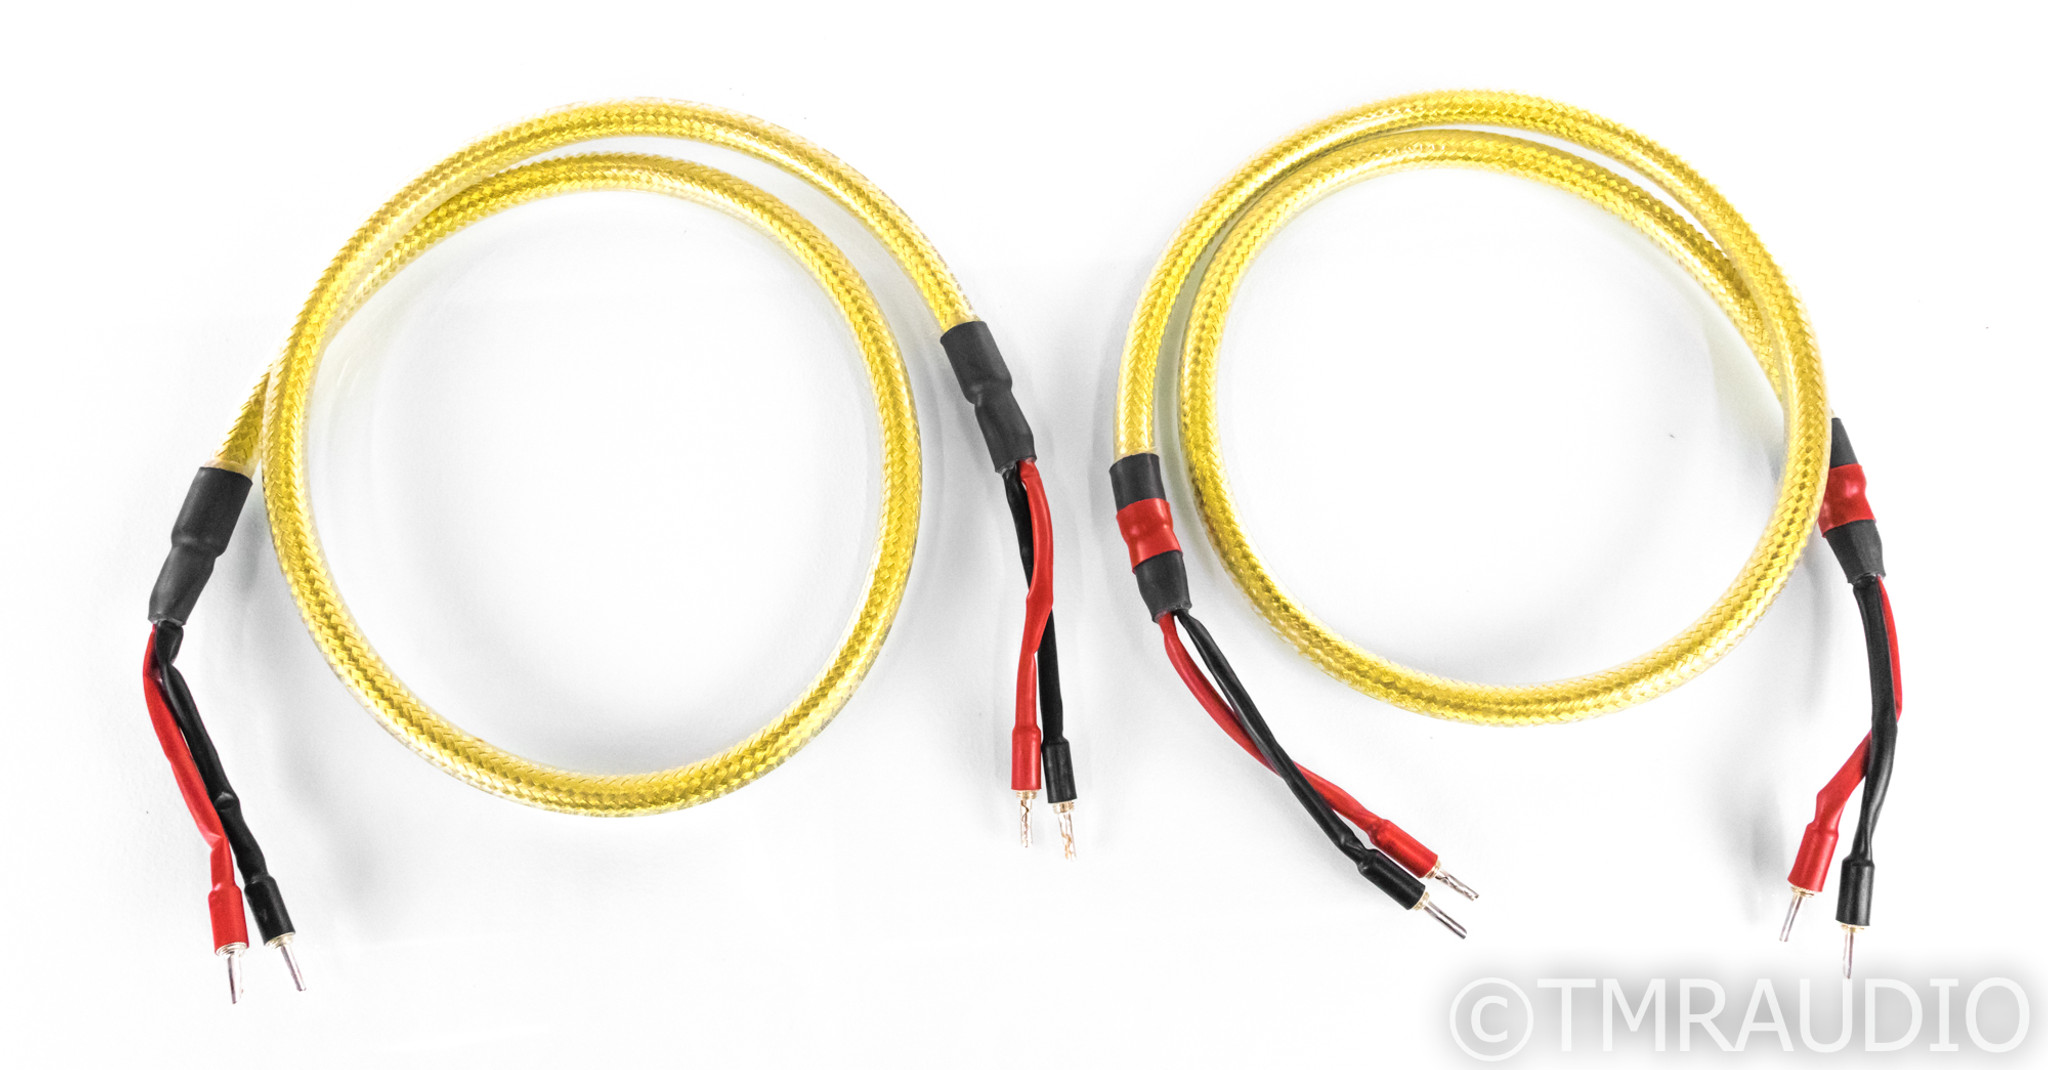 WireWorld Gold Eclipse 5 Speaker Cables; 1.5m Pair